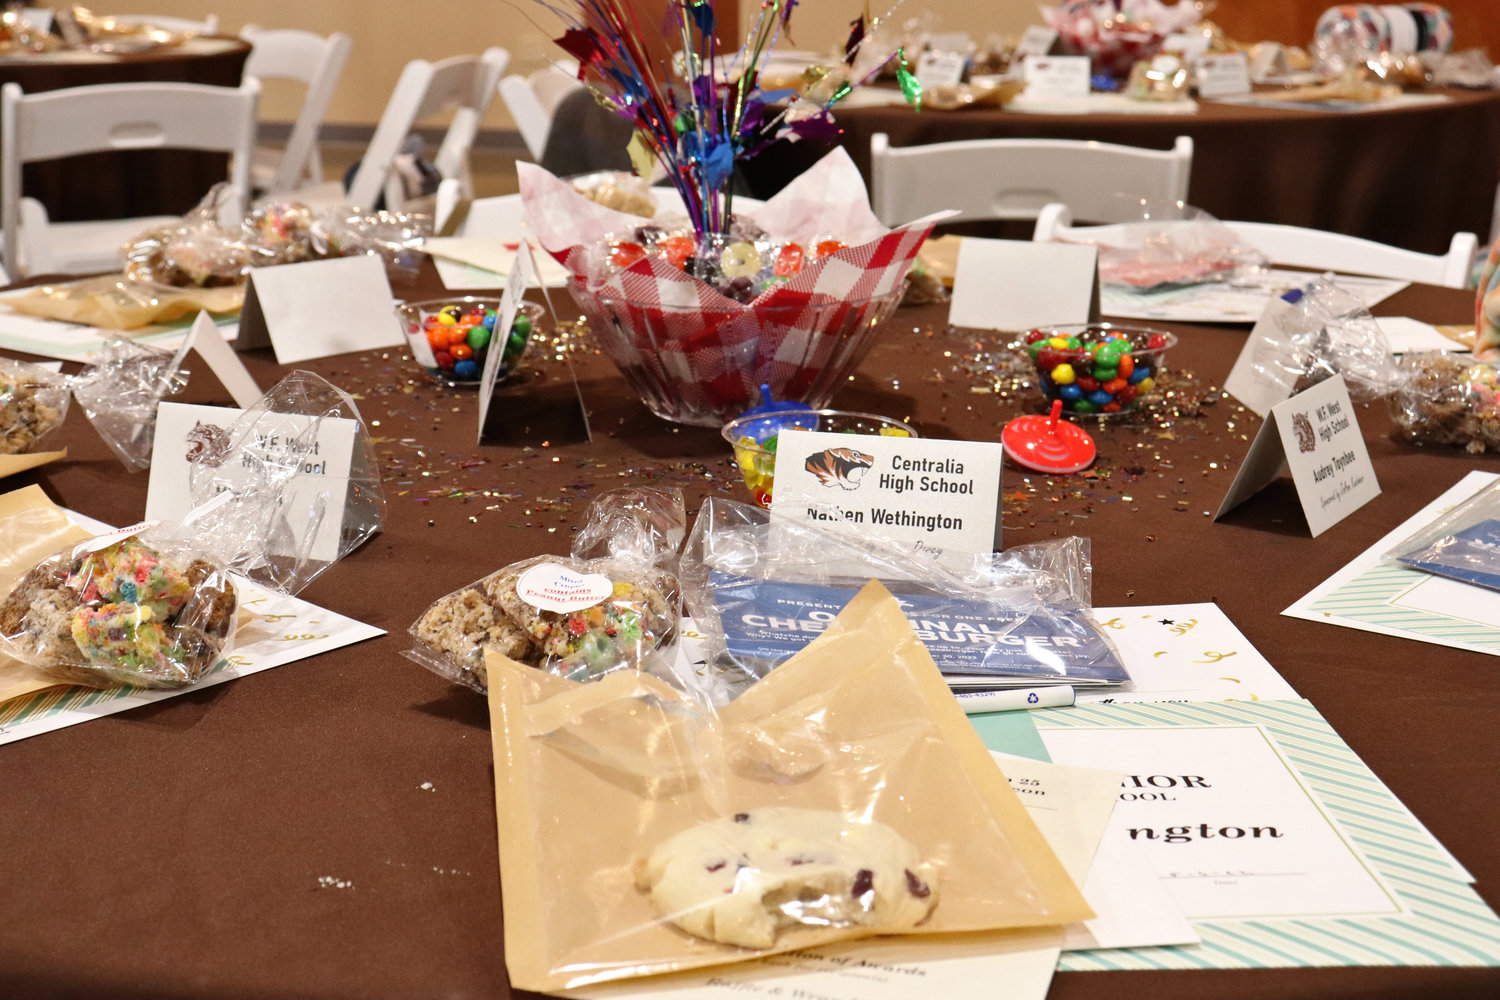 Treats donated by various businesses in Lewis County lie scattered across a table at the Rob Fuller Top 25 Scholarship Luncheon in Chehalis in Monday.